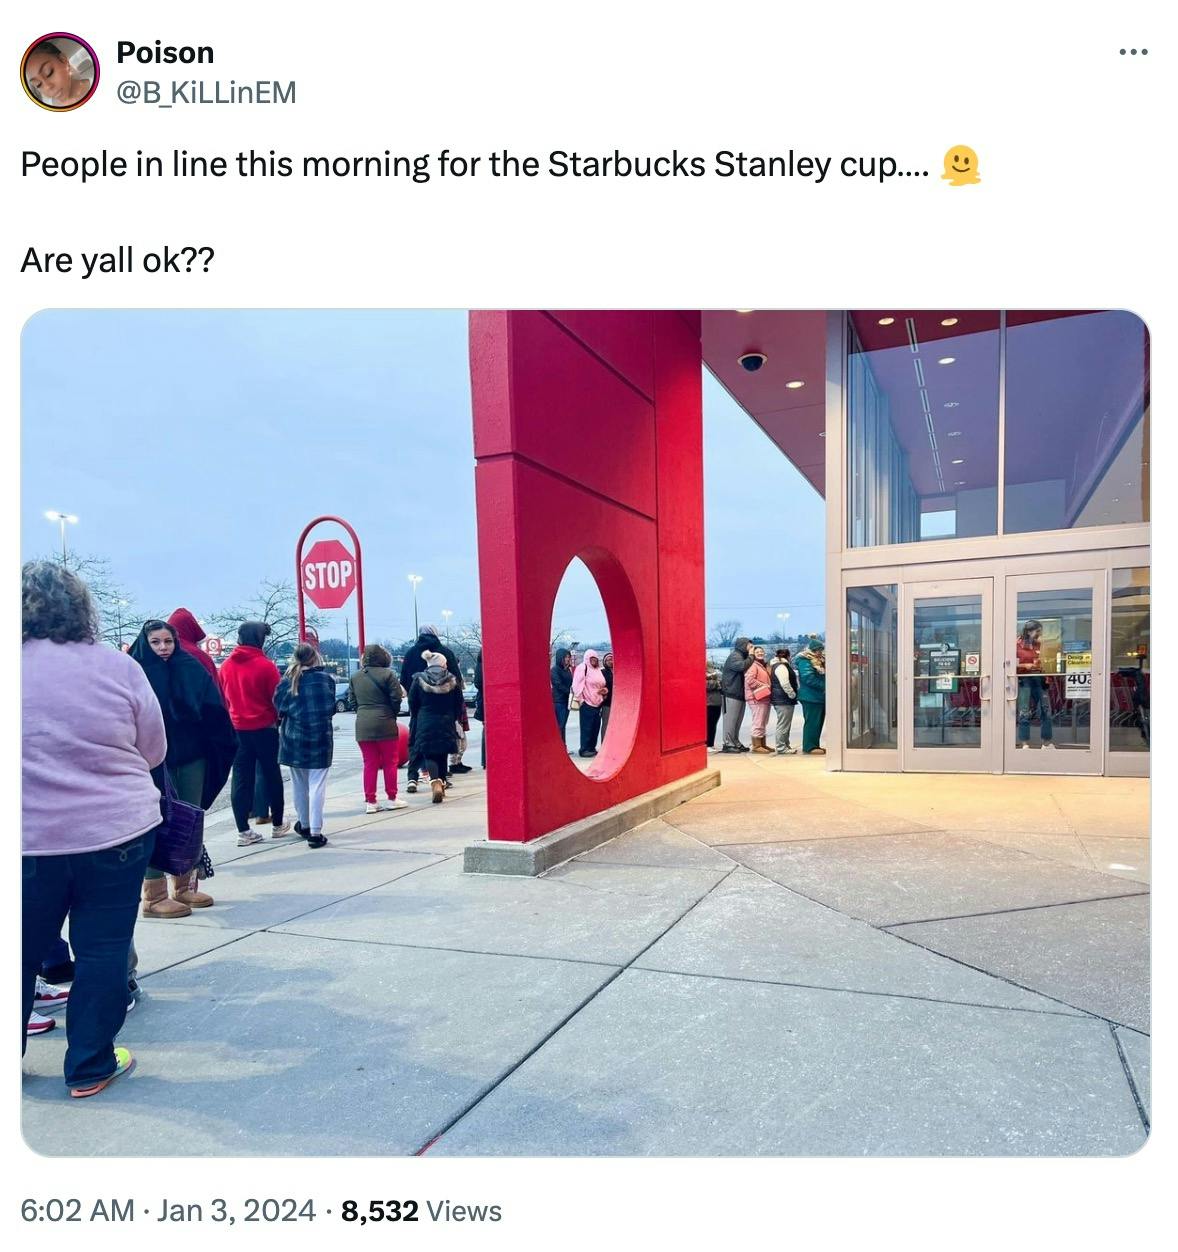 Stanley cup memes: a tweet showing a long line at Target